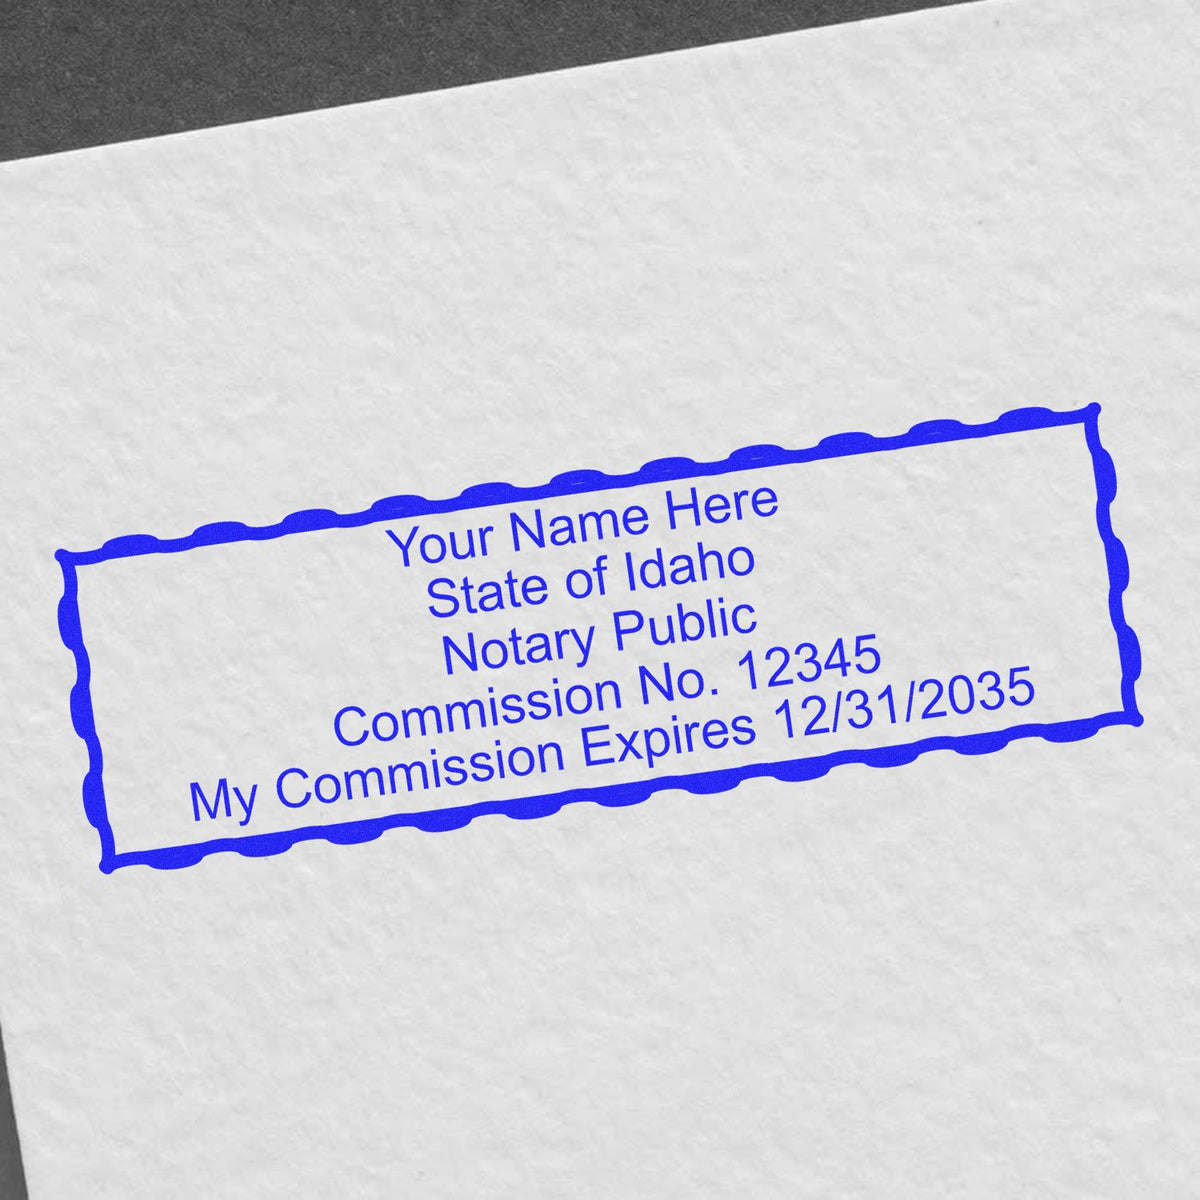 An alternative view of the Super Slim Idaho Notary Public Stamp stamped on a sheet of paper showing the image in use